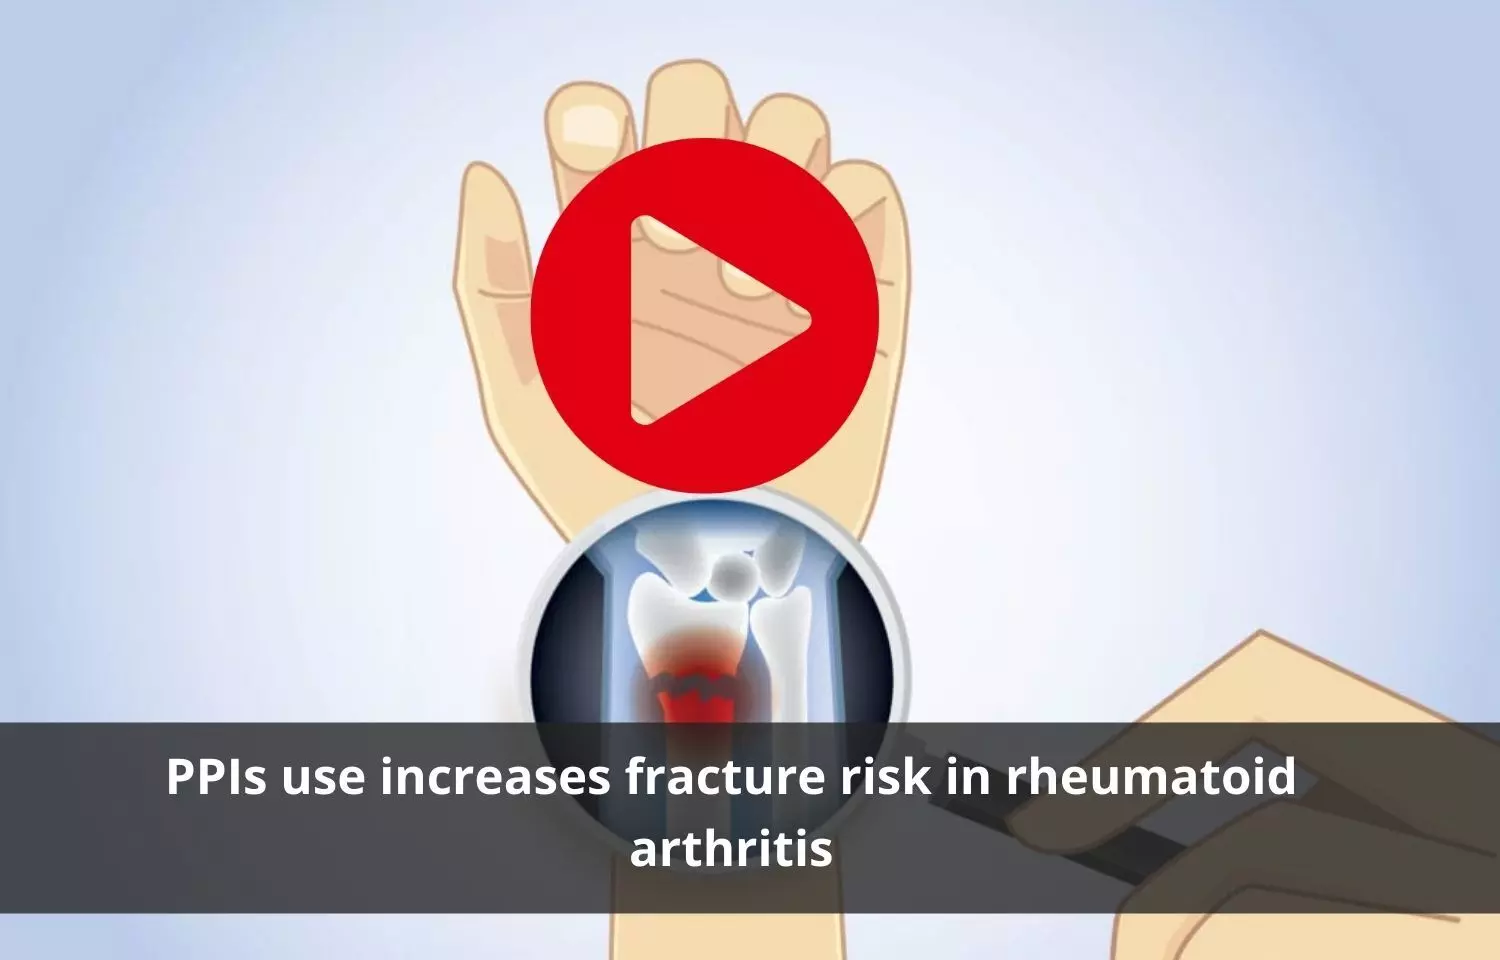 PPIs use to cause fracture risk in rheumatoid arthritis